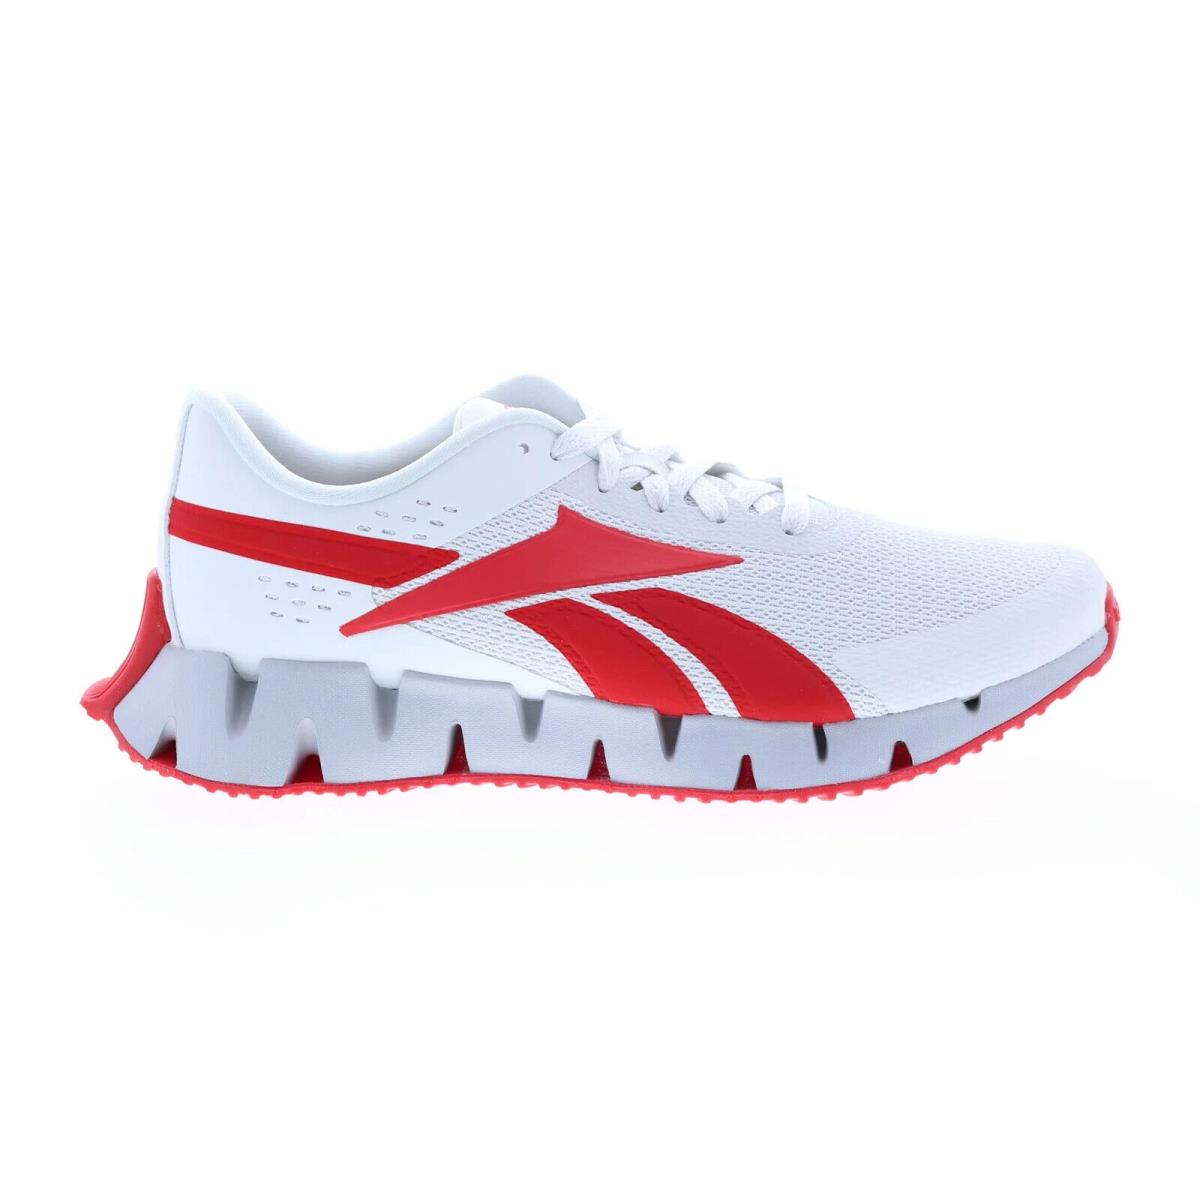 Mens Reebok Zig Dynamica 2.0 Running Shoes Sneakers White Red Grey HQ5889 - White